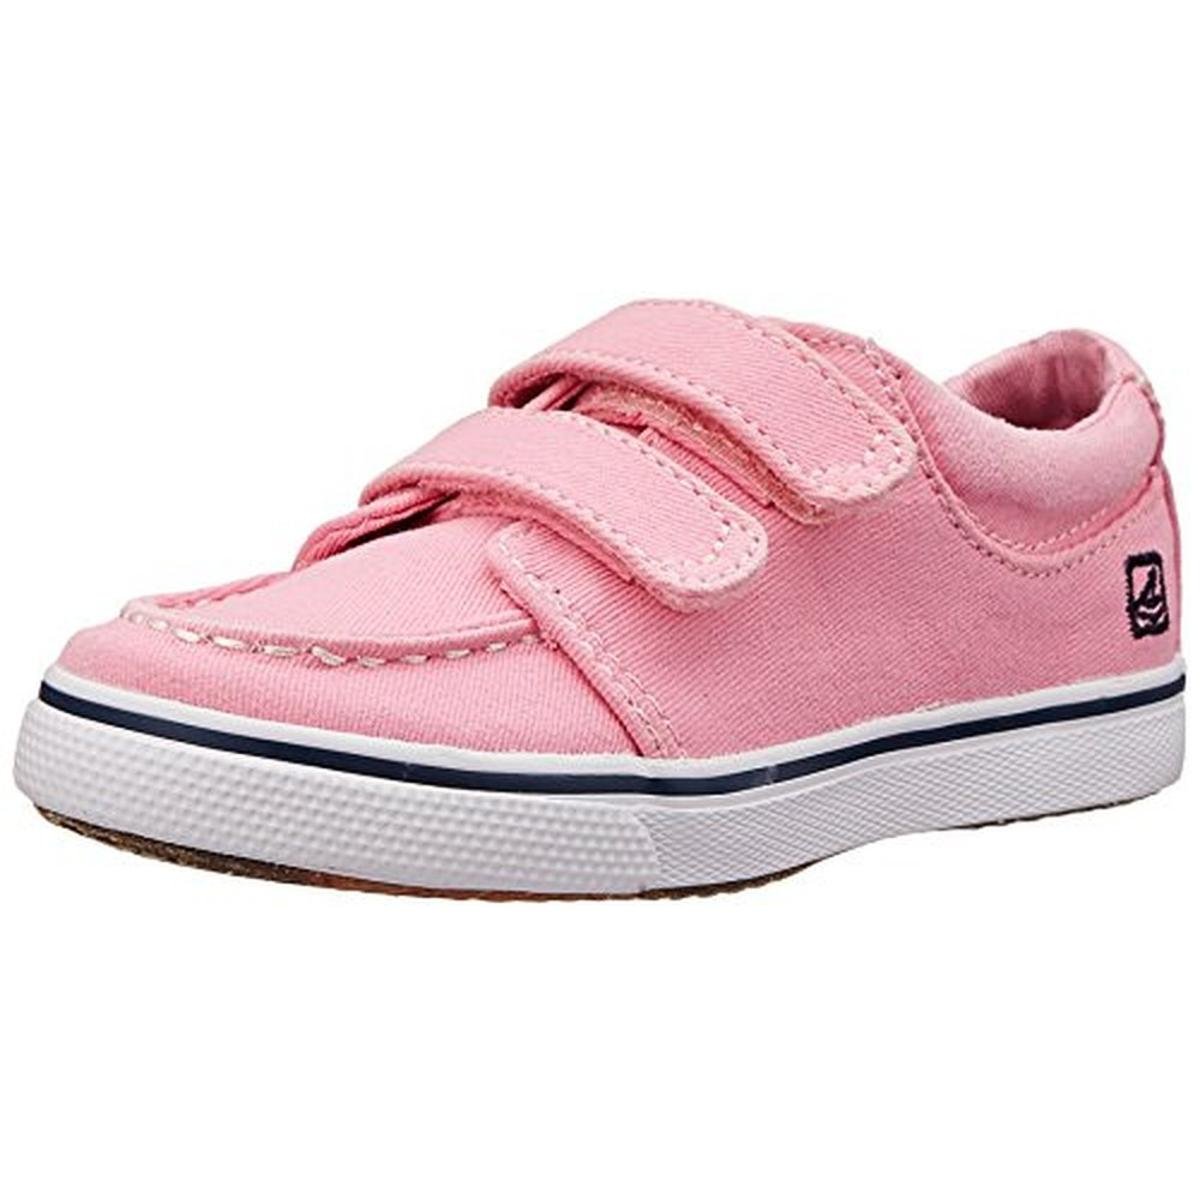 Sperry 2224 Hallie Pink Canvas Toddler Girls Velcro Casual Shoes 8 BHFO